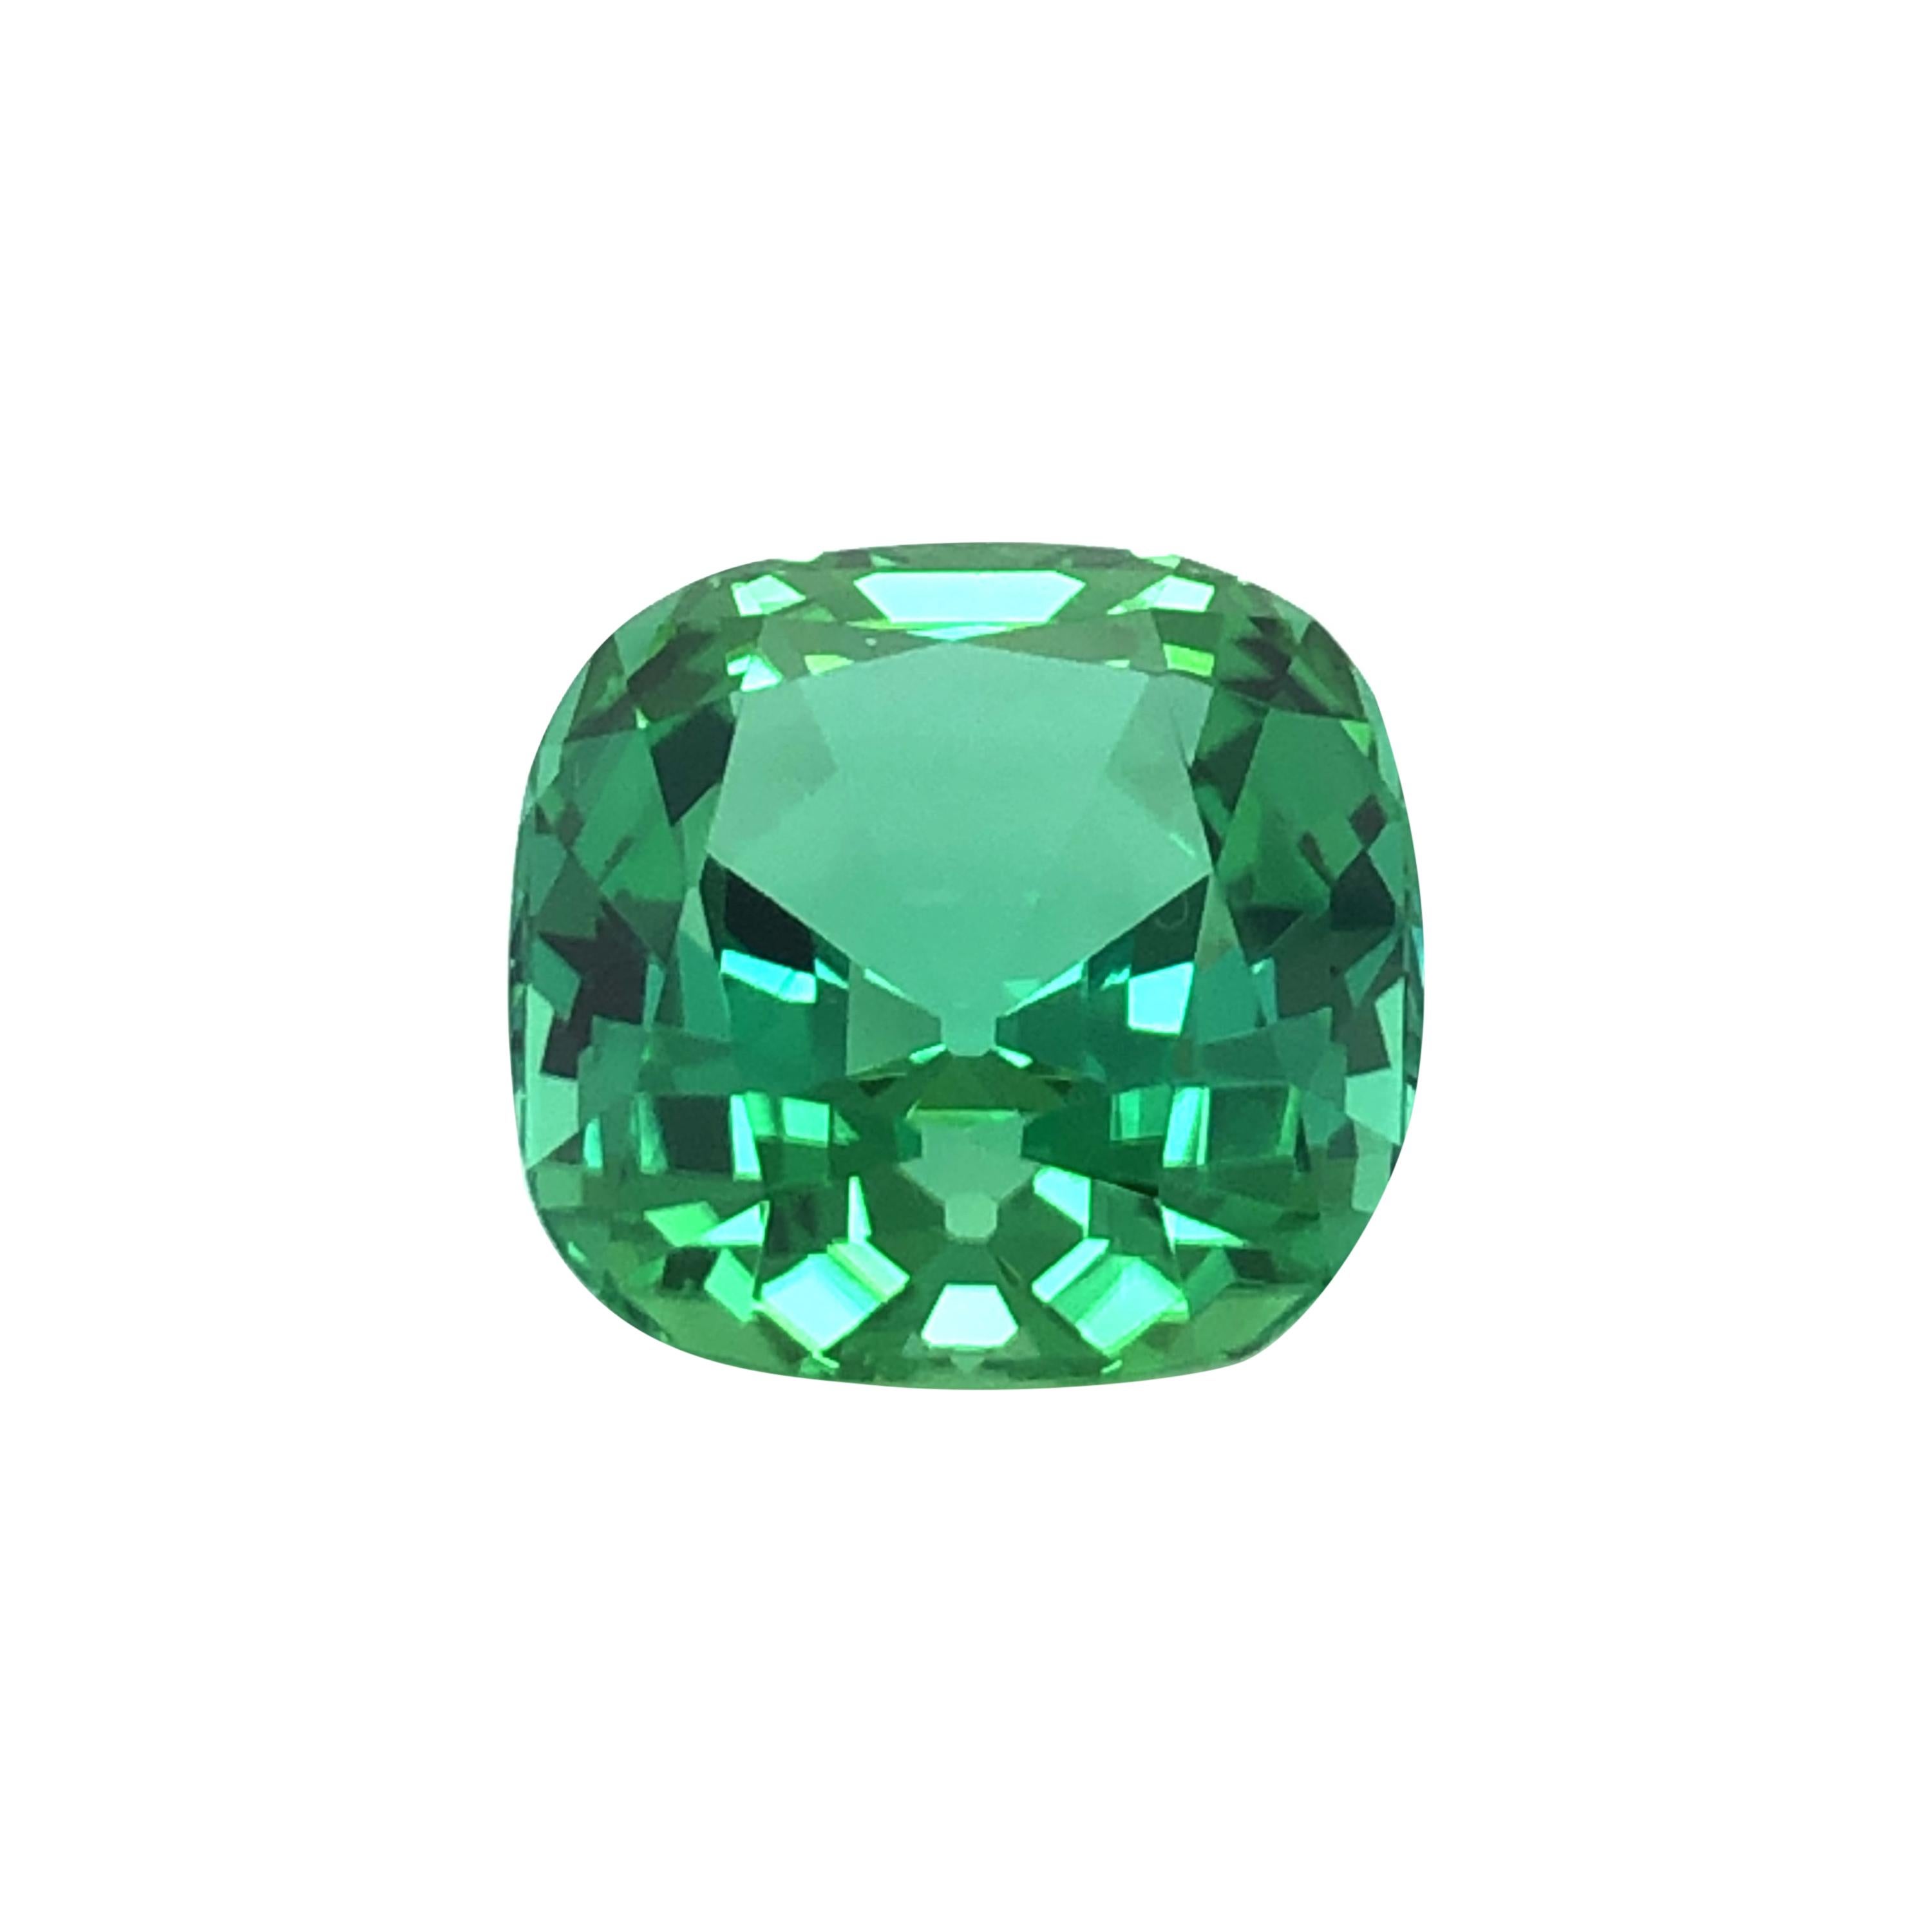 Vibrant Mint Colored Square Cushion Tourmaline of 15.76 Ct For Sale